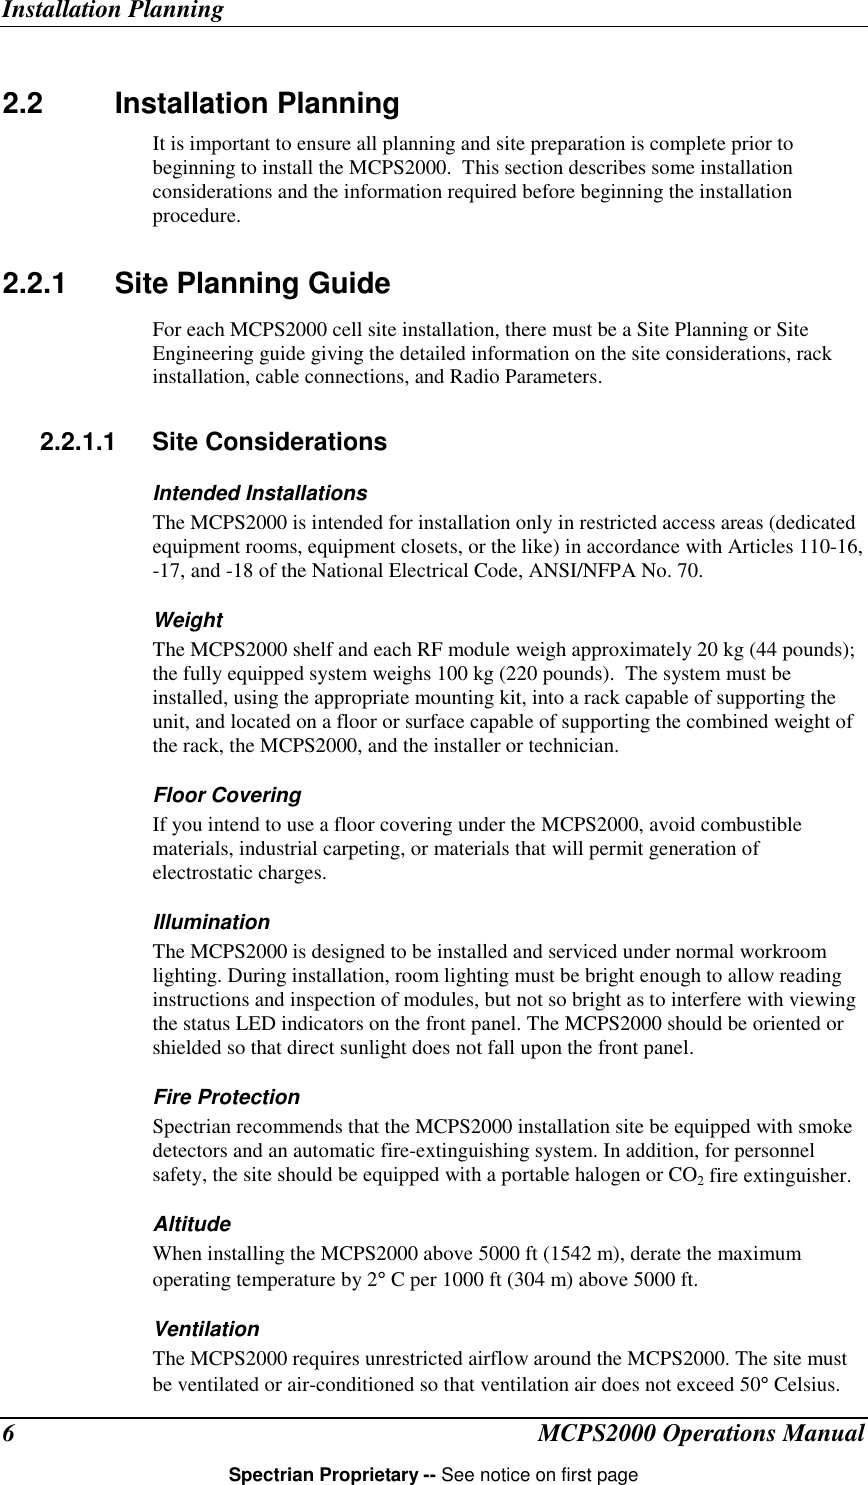 Installation PlanningMCPS2000 Operations ManualSpectrian Proprietary -- See notice on first page62.2 Installation PlanningIt is important to ensure all planning and site preparation is complete prior tobeginning to install the MCPS2000.  This section describes some installationconsiderations and the information required before beginning the installationprocedure.2.2.1  Site Planning GuideFor each MCPS2000 cell site installation, there must be a Site Planning or SiteEngineering guide giving the detailed information on the site considerations, rackinstallation, cable connections, and Radio Parameters.2.2.1.1 Site ConsiderationsIntended InstallationsThe MCPS2000 is intended for installation only in restricted access areas (dedicatedequipment rooms, equipment closets, or the like) in accordance with Articles 110-16,-17, and -18 of the National Electrical Code, ANSI/NFPA No. 70.WeightThe MCPS2000 shelf and each RF module weigh approximately 20 kg (44 pounds);the fully equipped system weighs 100 kg (220 pounds).  The system must beinstalled, using the appropriate mounting kit, into a rack capable of supporting theunit, and located on a floor or surface capable of supporting the combined weight ofthe rack, the MCPS2000, and the installer or technician.Floor CoveringIf you intend to use a floor covering under the MCPS2000, avoid combustiblematerials, industrial carpeting, or materials that will permit generation ofelectrostatic charges.IlluminationThe MCPS2000 is designed to be installed and serviced under normal workroomlighting. During installation, room lighting must be bright enough to allow readinginstructions and inspection of modules, but not so bright as to interfere with viewingthe status LED indicators on the front panel. The MCPS2000 should be oriented orshielded so that direct sunlight does not fall upon the front panel.Fire ProtectionSpectrian recommends that the MCPS2000 installation site be equipped with smokedetectors and an automatic fire-extinguishing system. In addition, for personnelsafety, the site should be equipped with a portable halogen or CO2 fire extinguisher.AltitudeWhen installing the MCPS2000 above 5000 ft (1542 m), derate the maximumoperating temperature by 2° C per 1000 ft (304 m) above 5000 ft.VentilationThe MCPS2000 requires unrestricted airflow around the MCPS2000. The site mustbe ventilated or air-conditioned so that ventilation air does not exceed 50° Celsius.